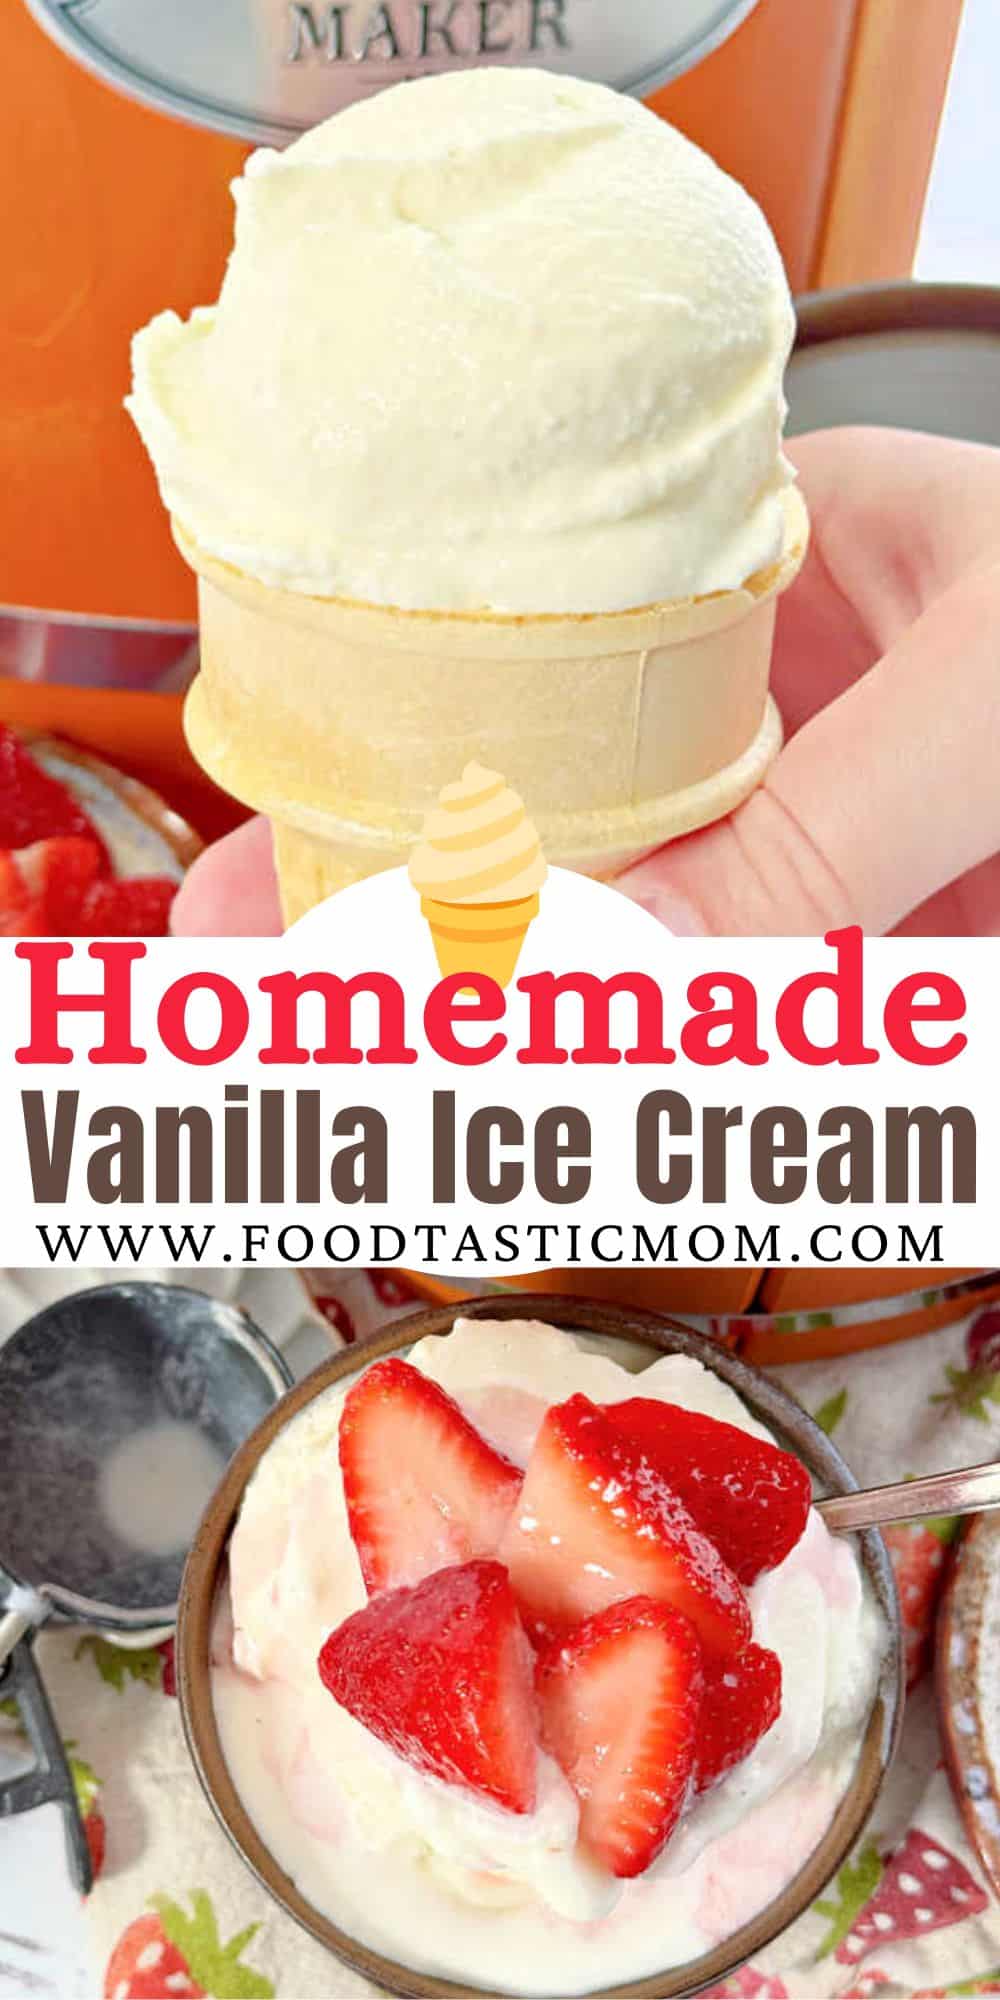 My homemade vanilla ice cream recipe is a dream - with just six all natural ingredients it is a quintessential summer treat! via @foodtasticmom